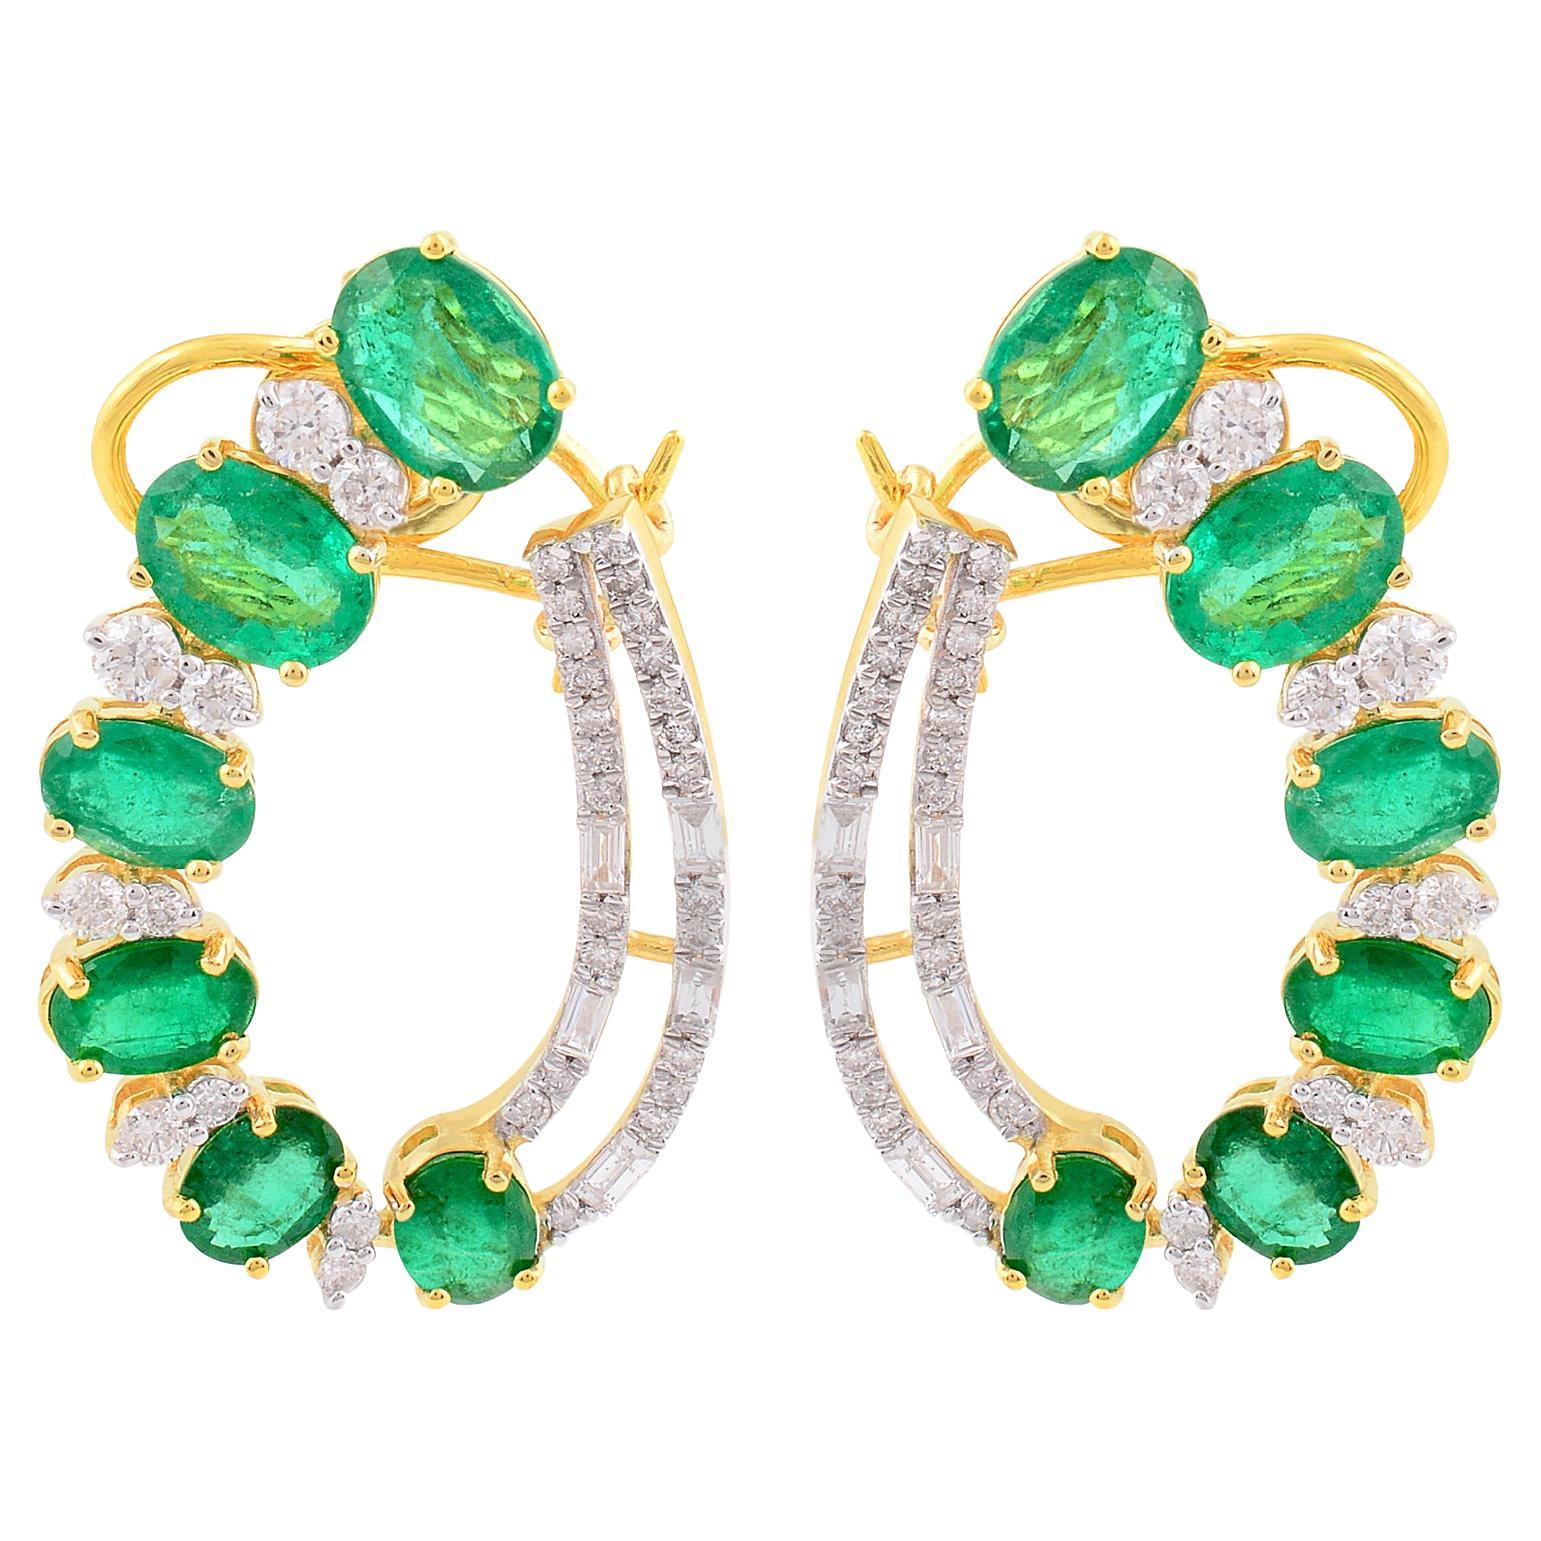 Oval Natural Emerald Stud Earrings Pave Diamond Solid 18k Yellow Gold Jewelry